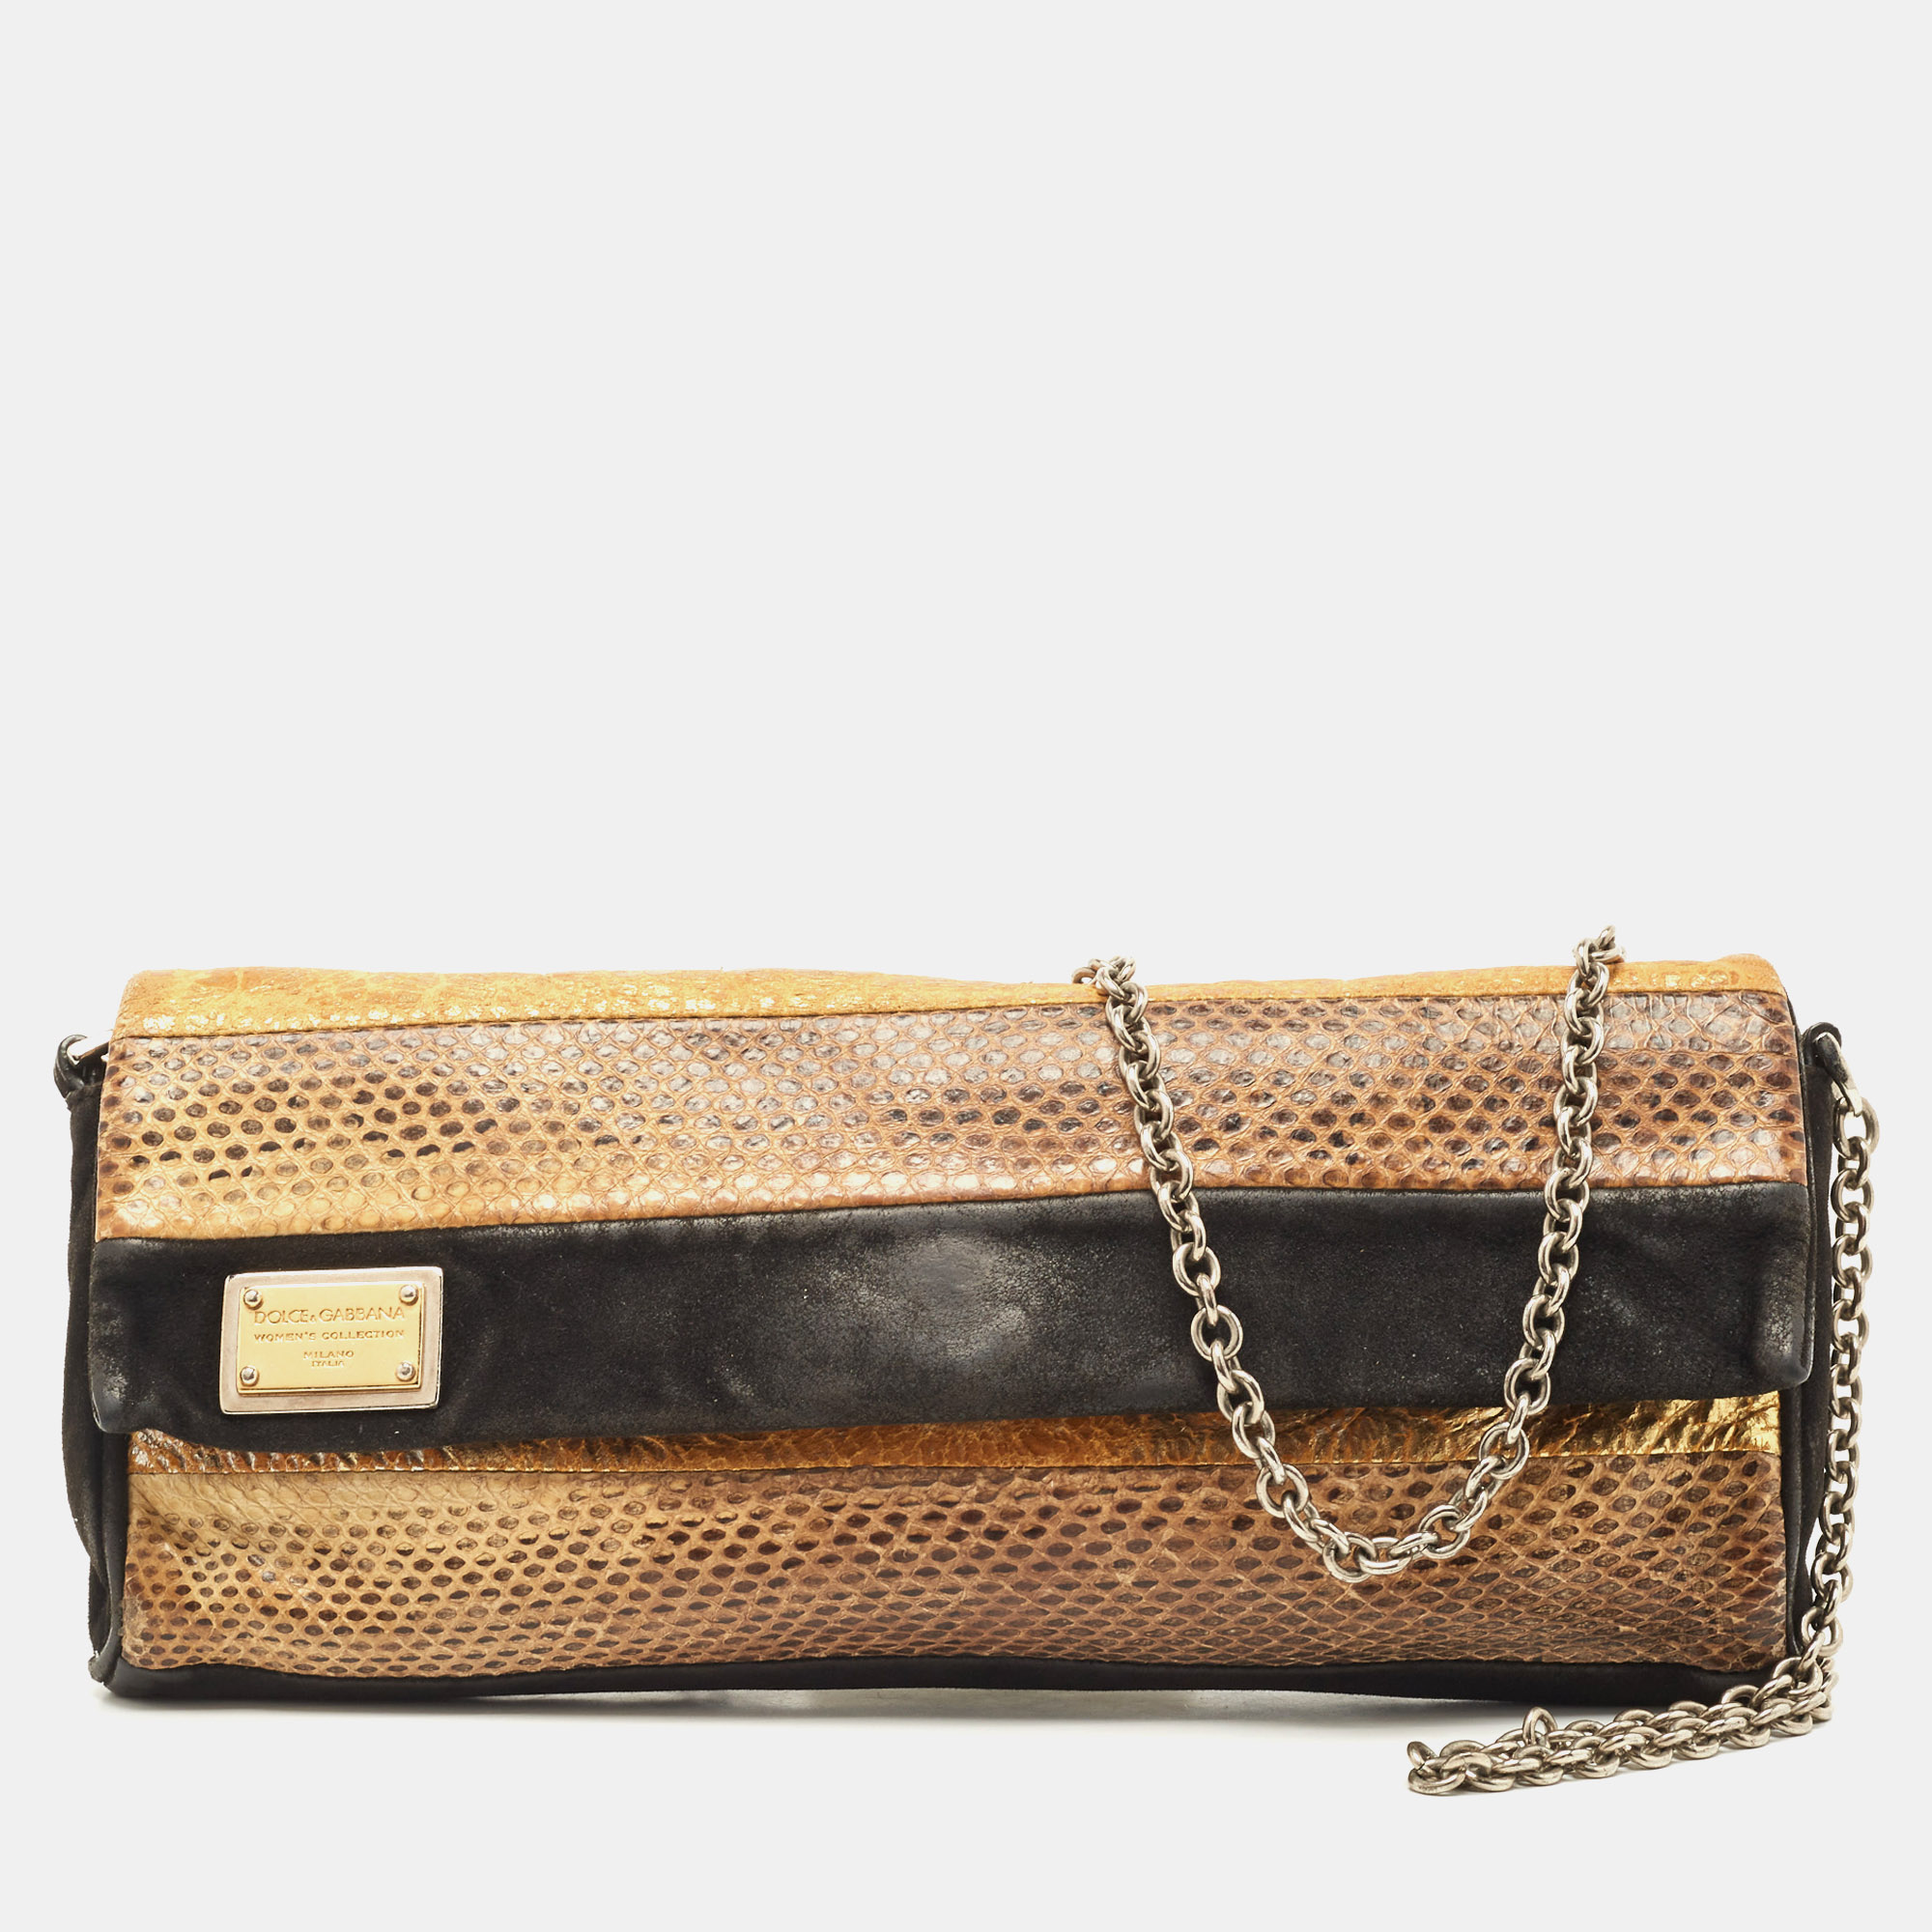 Pre-owned Dolce & Gabbana Black/brown Suede And Snakeskin Leather Chain Clutch